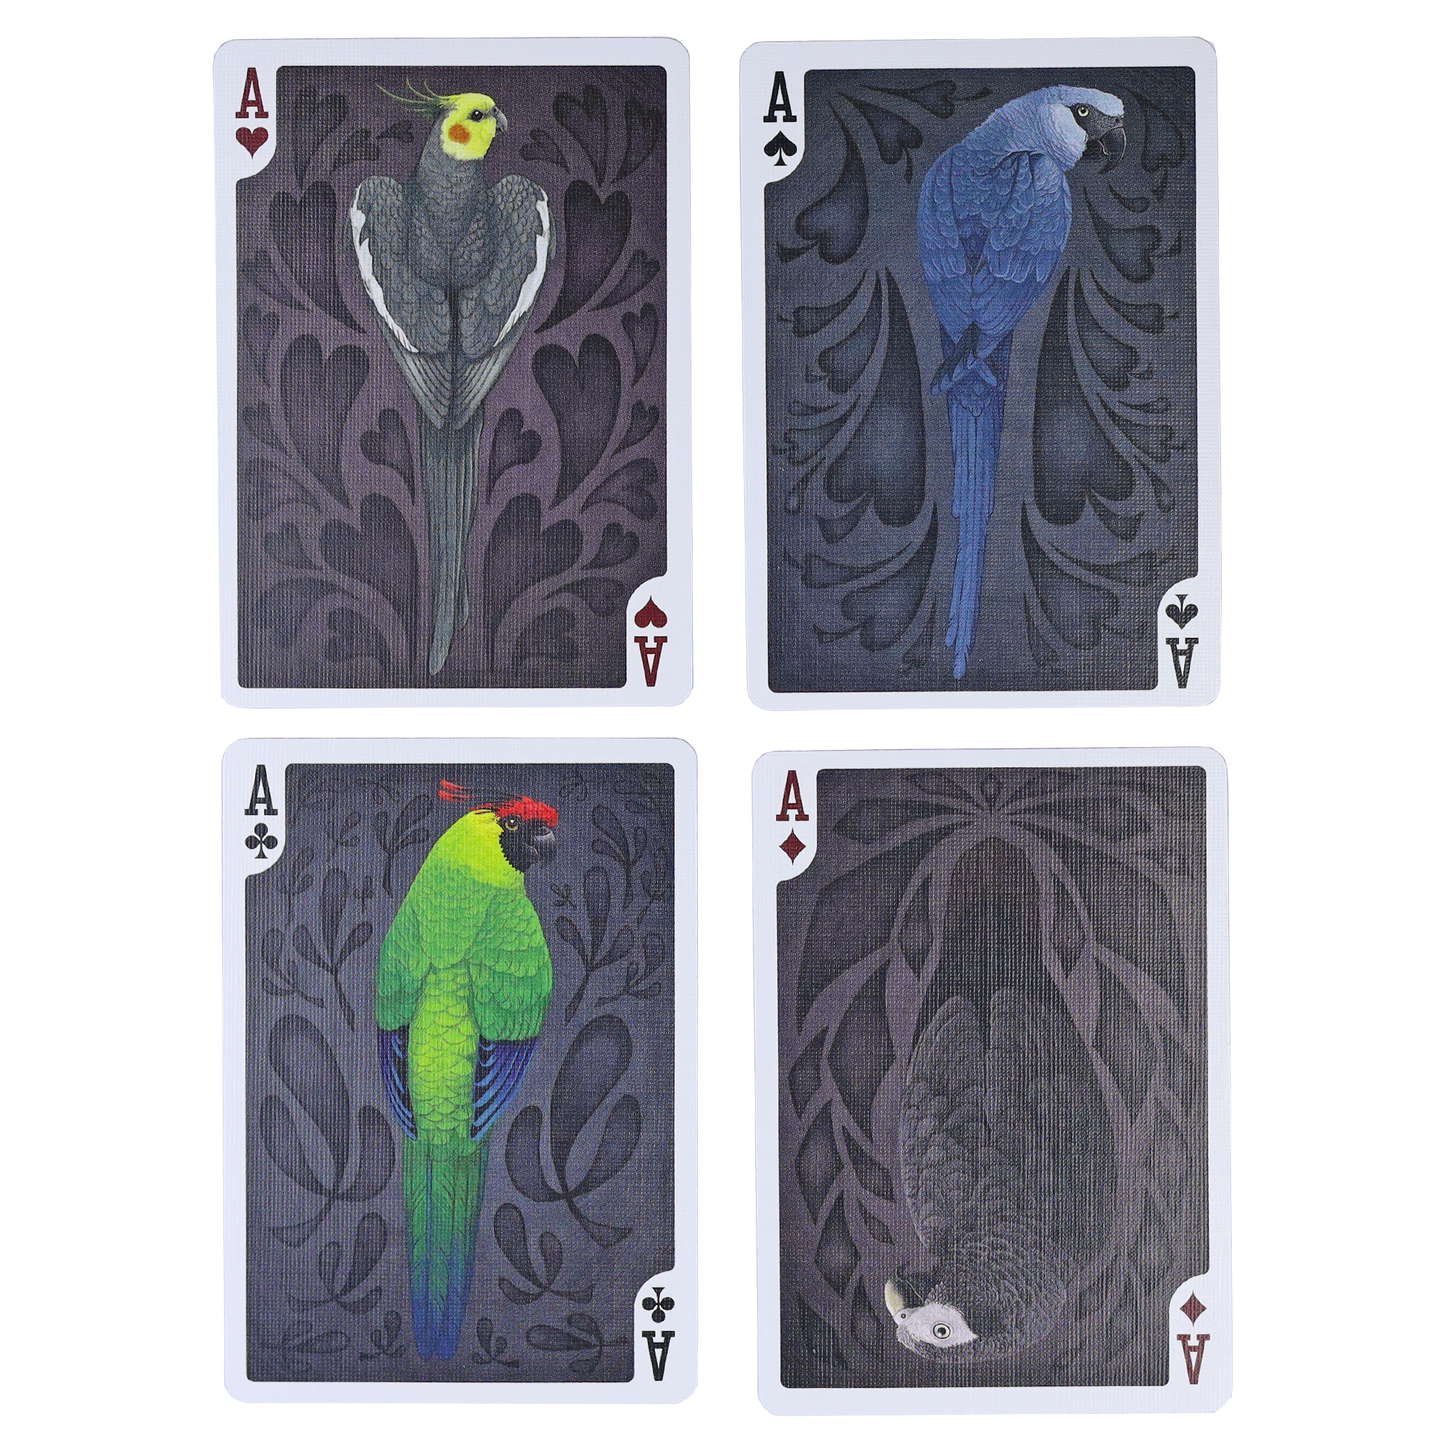 Parrot Bicycle Playing Cards